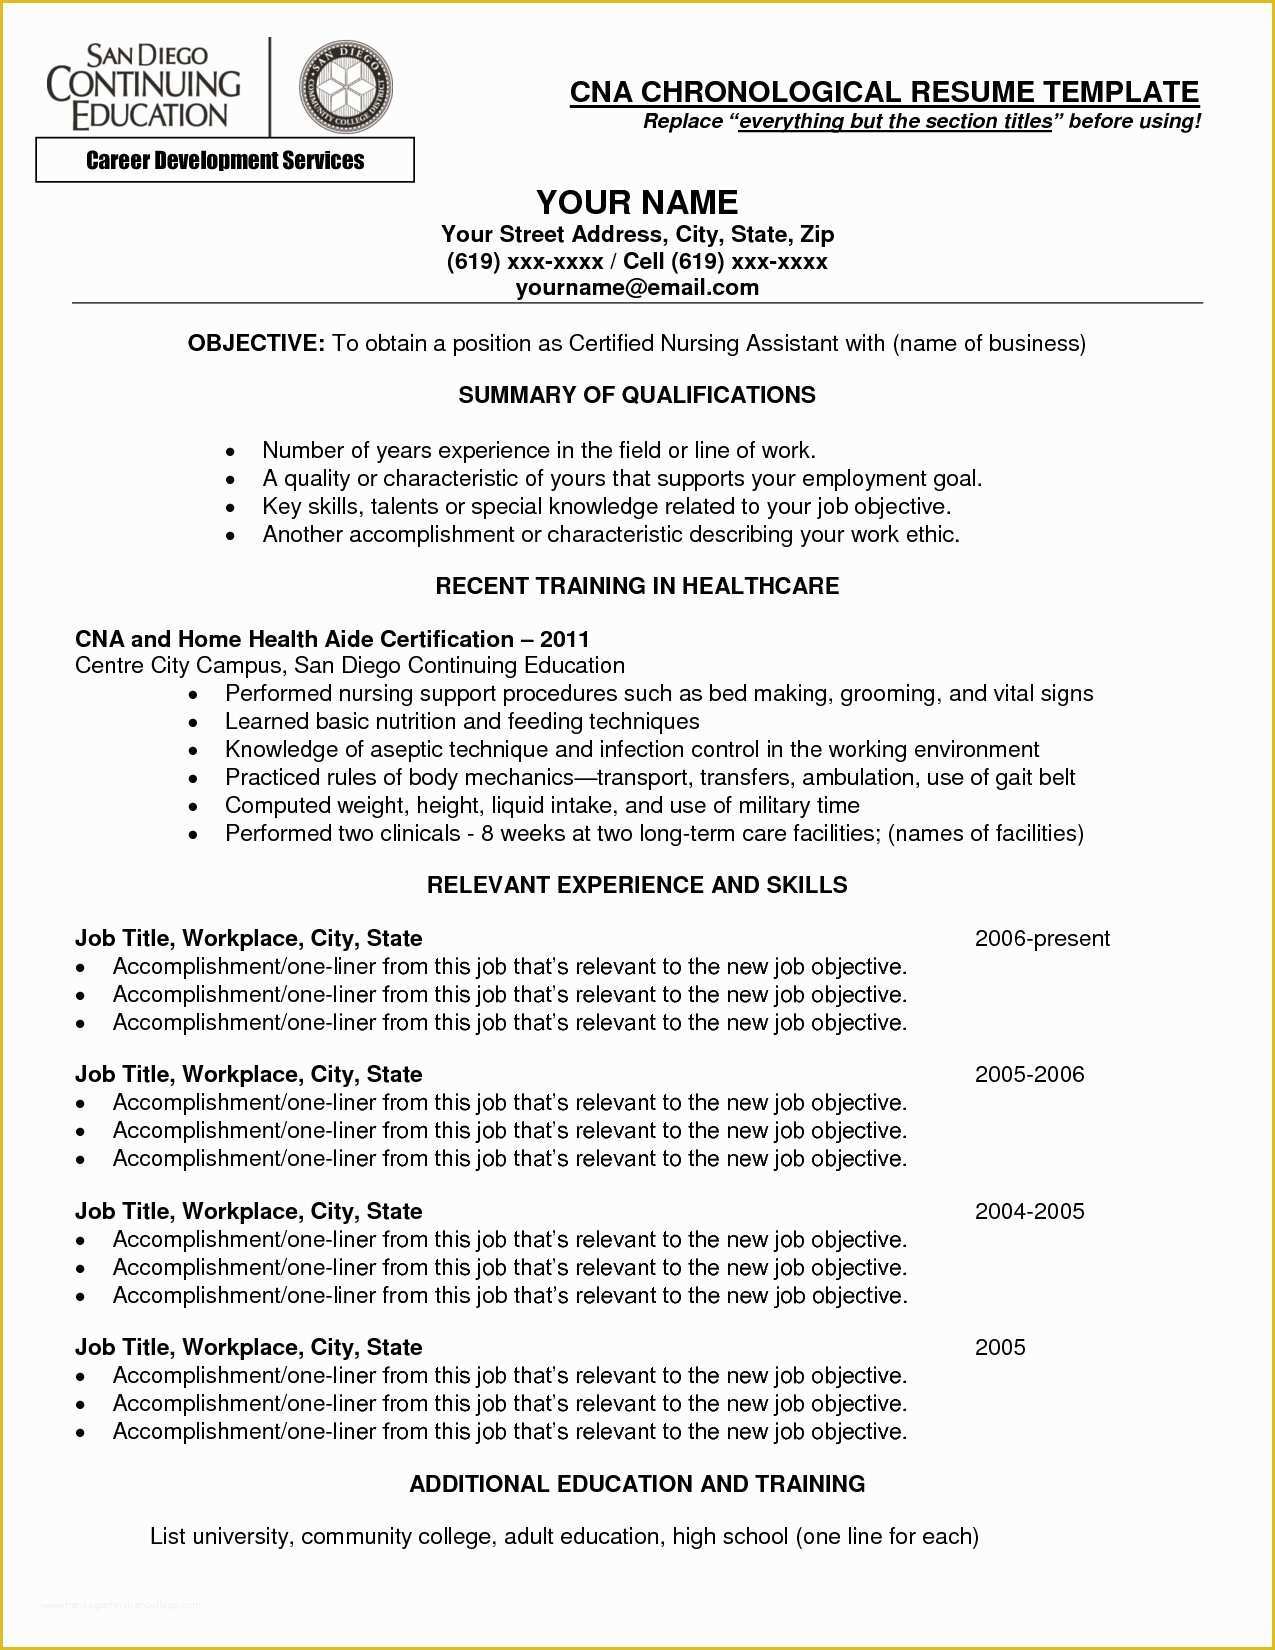 Free Pretty Resume Templates Of Free Resume Templates for Certified Nursing assistant